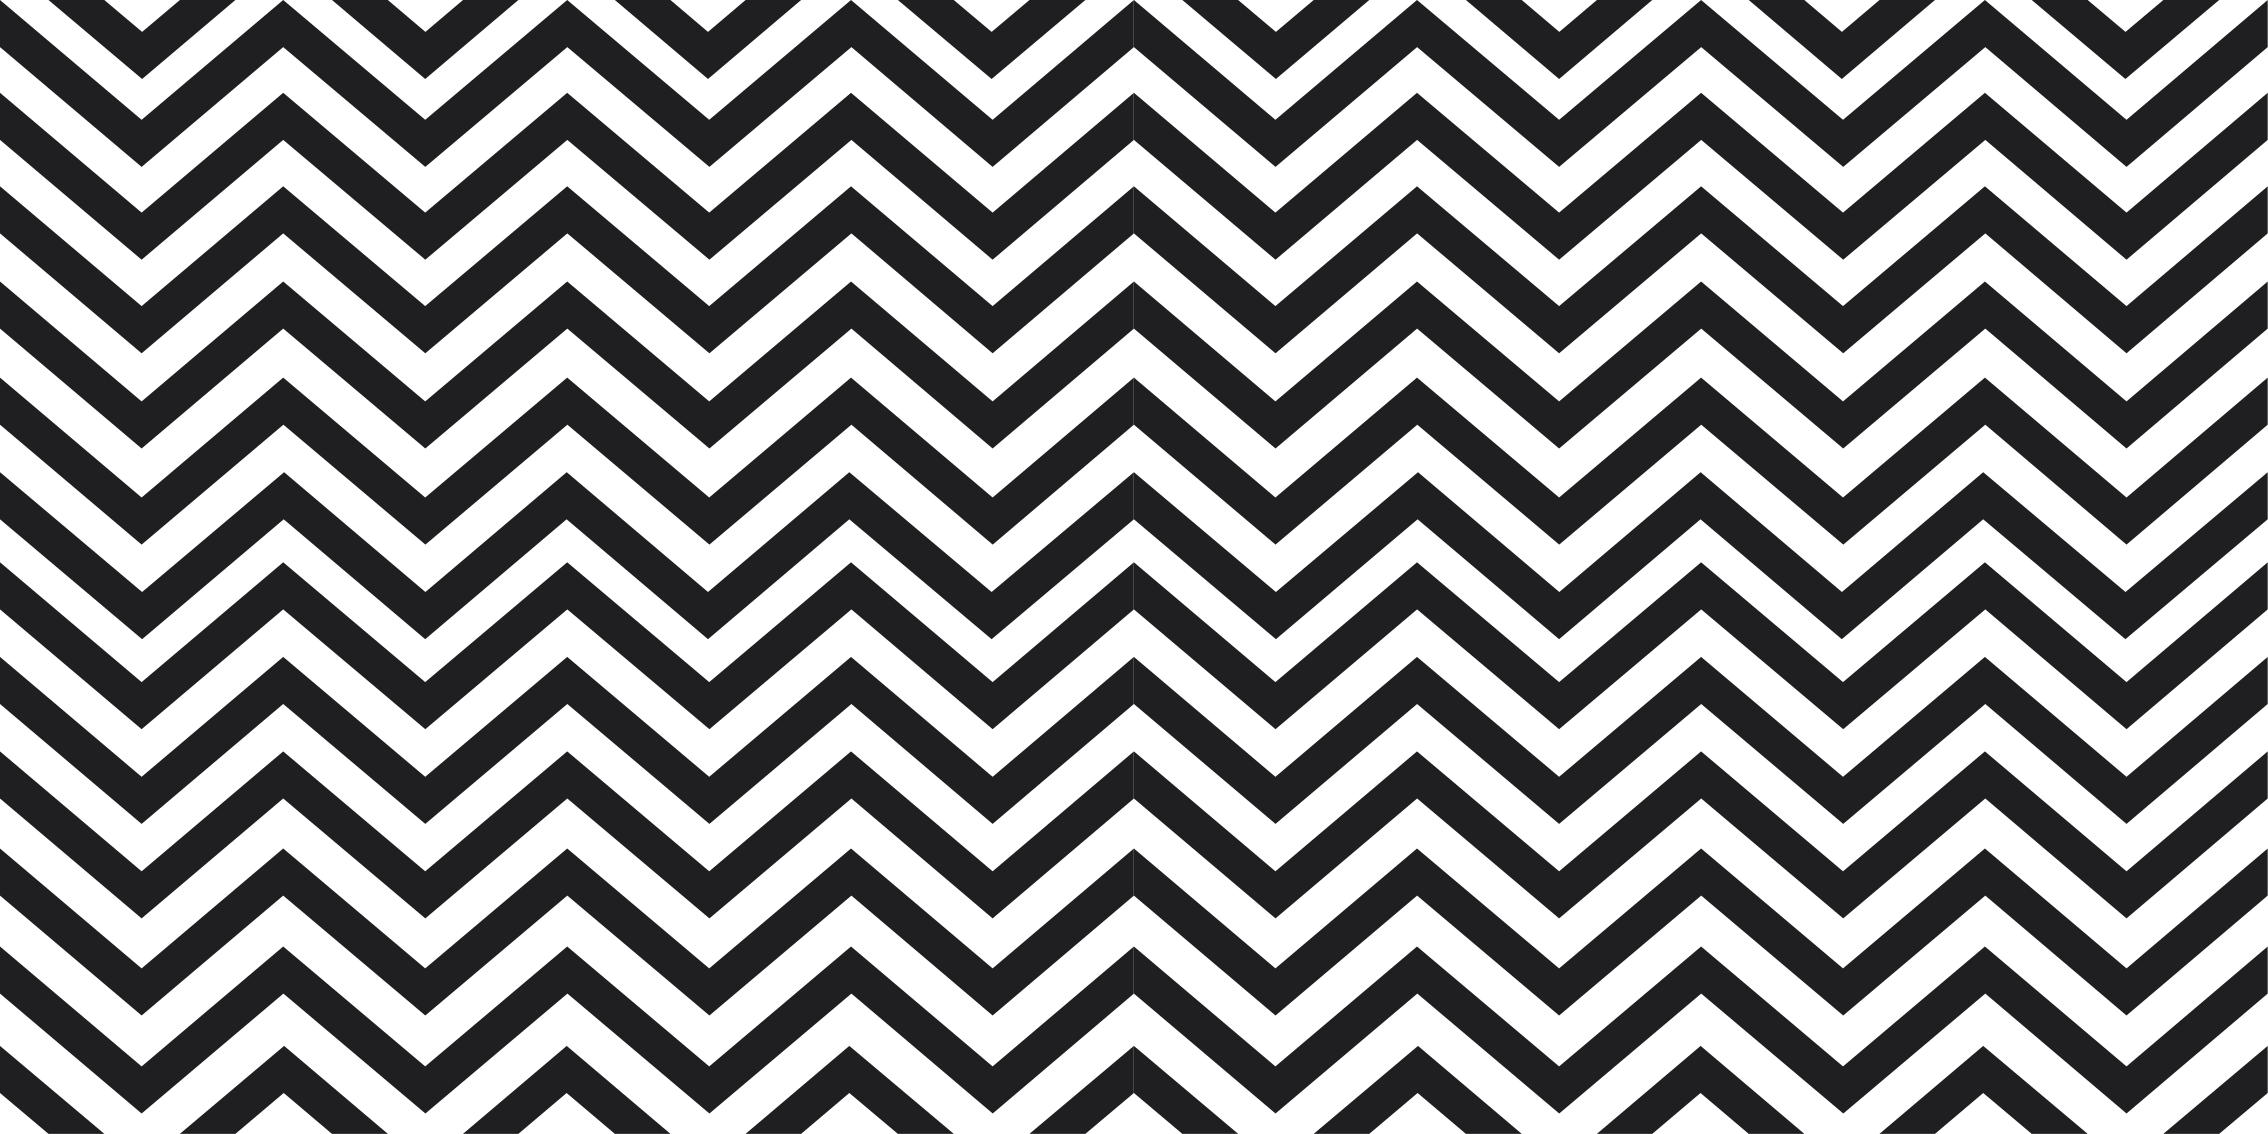 Classical black and white zig zag lines decals for furniture